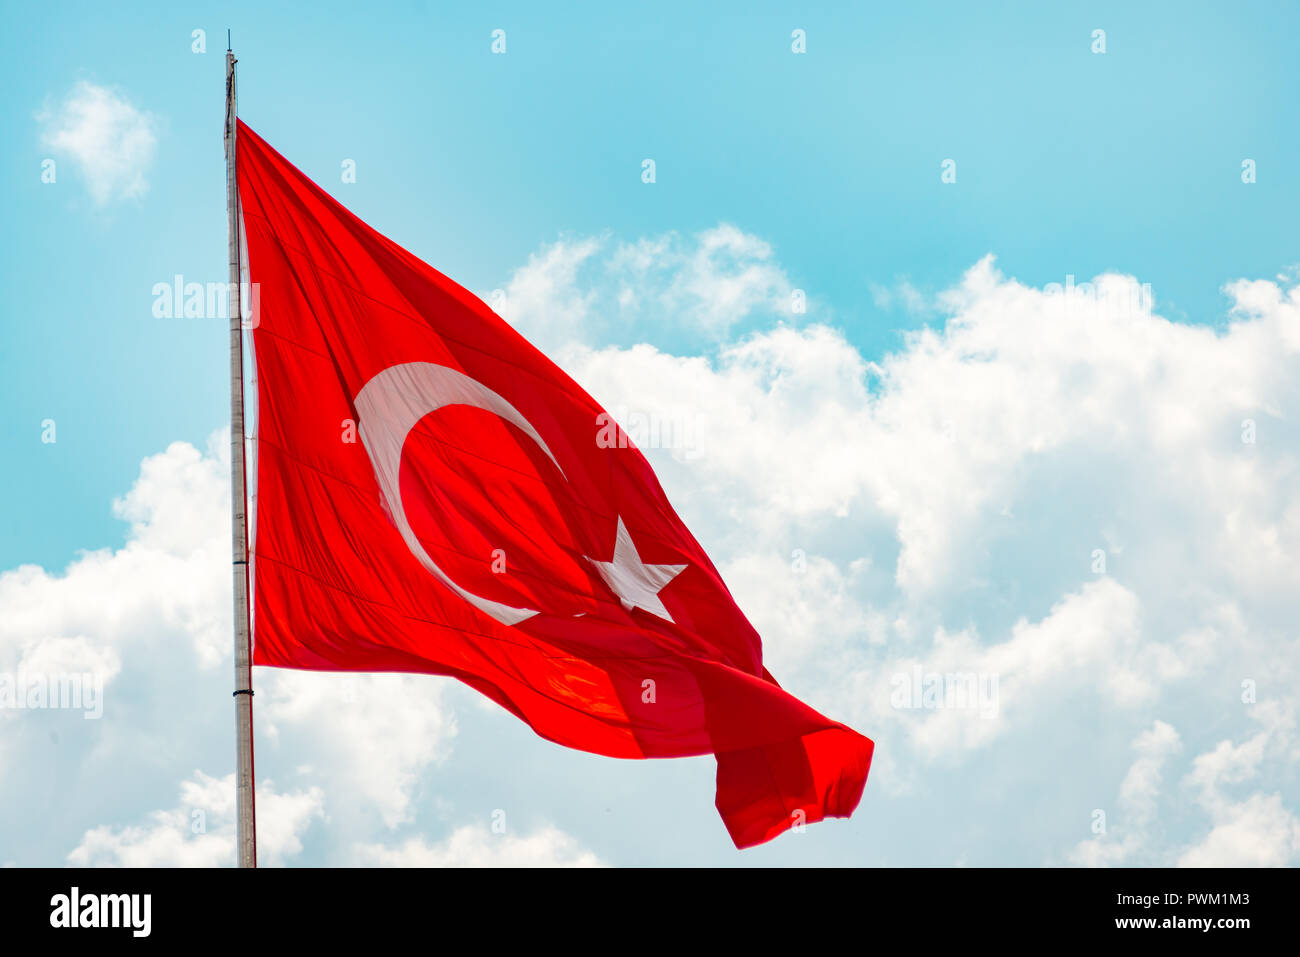 Metal pole with waving banner. Red flag with crescent moon and star, blue sky with clouds background. Rippled texture. National flag of Turkey. Pop Stock Photo - Alamy